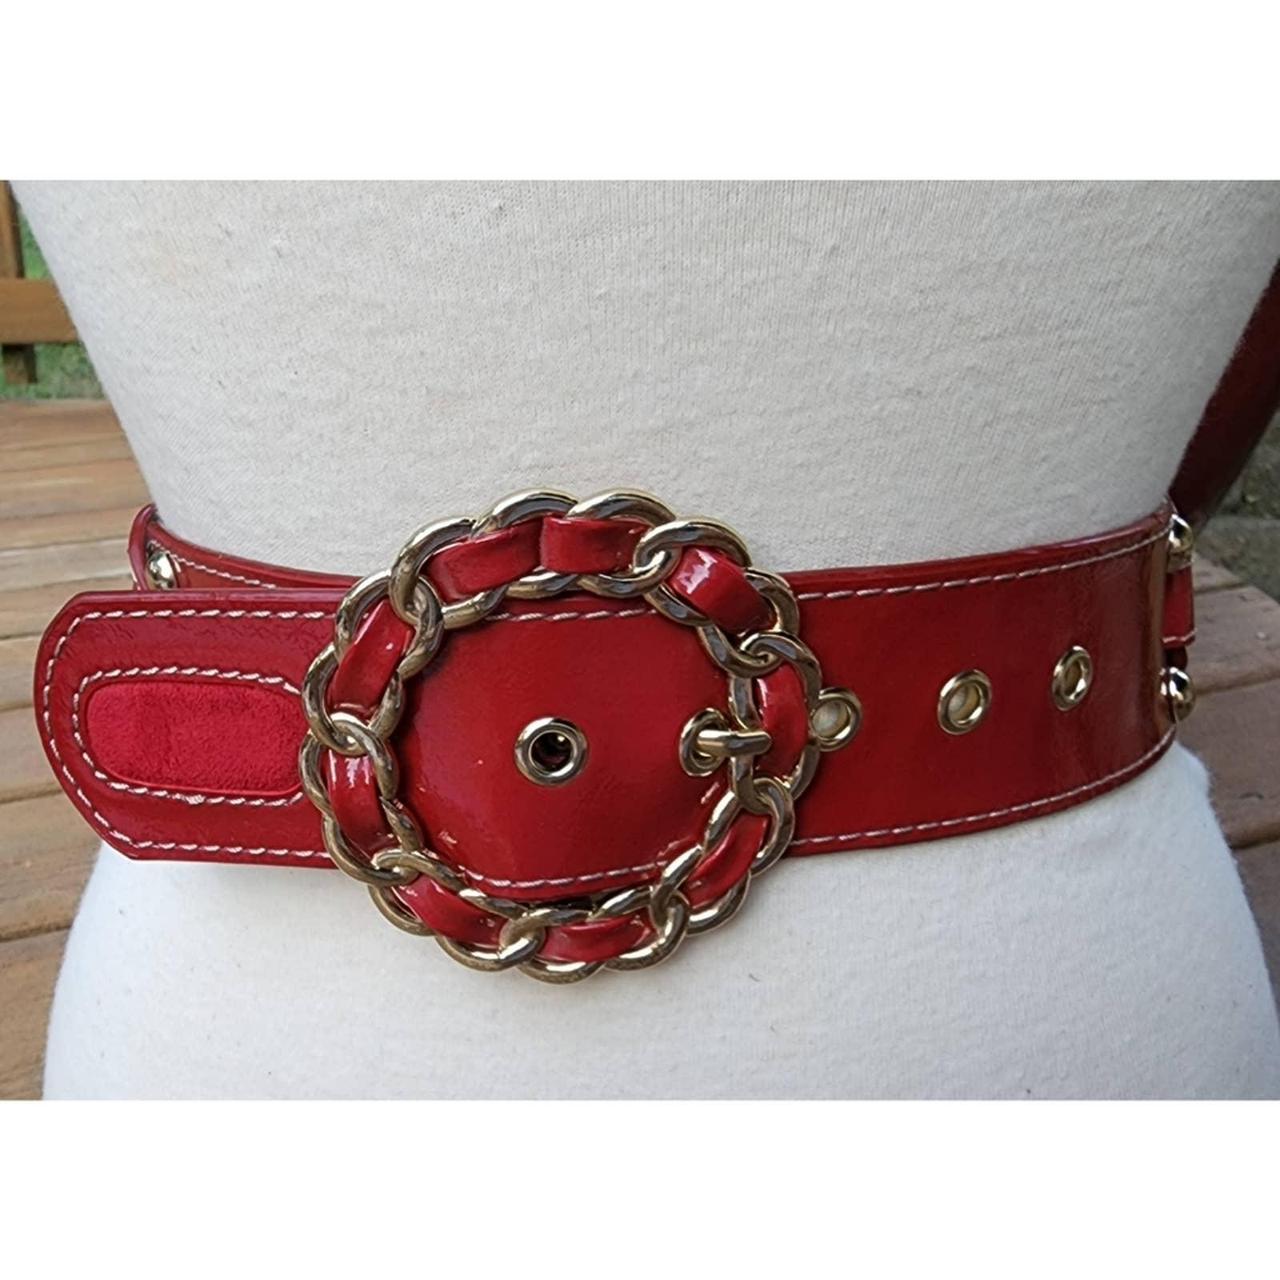 American Vintage Women's Red and Gold Belt (2)